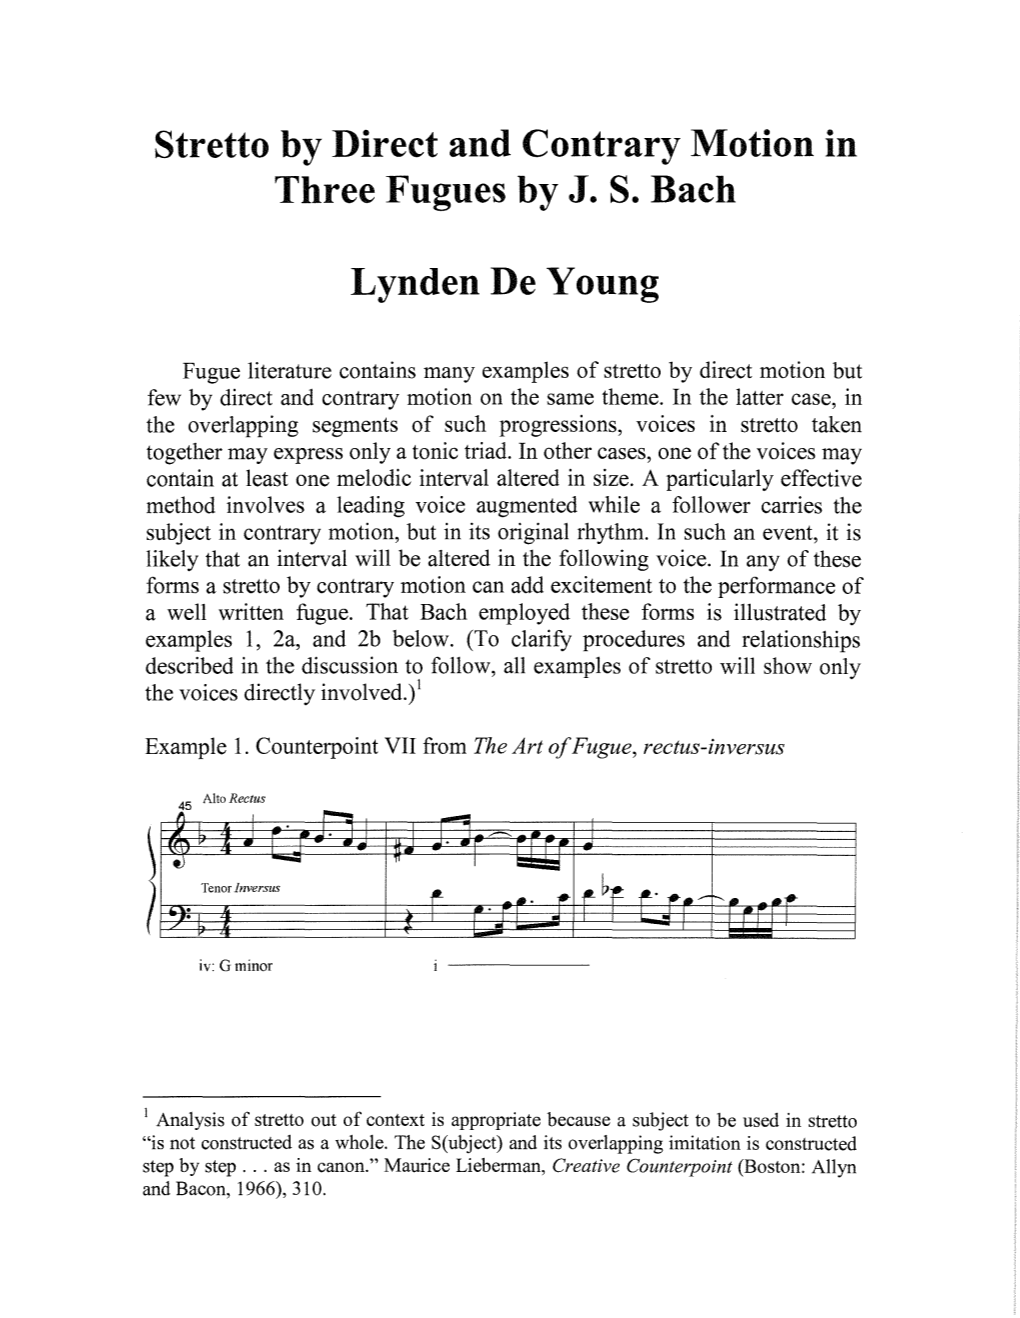 Stretto by Direct and Contrary Motion in Three Fugues by J. S. Bach